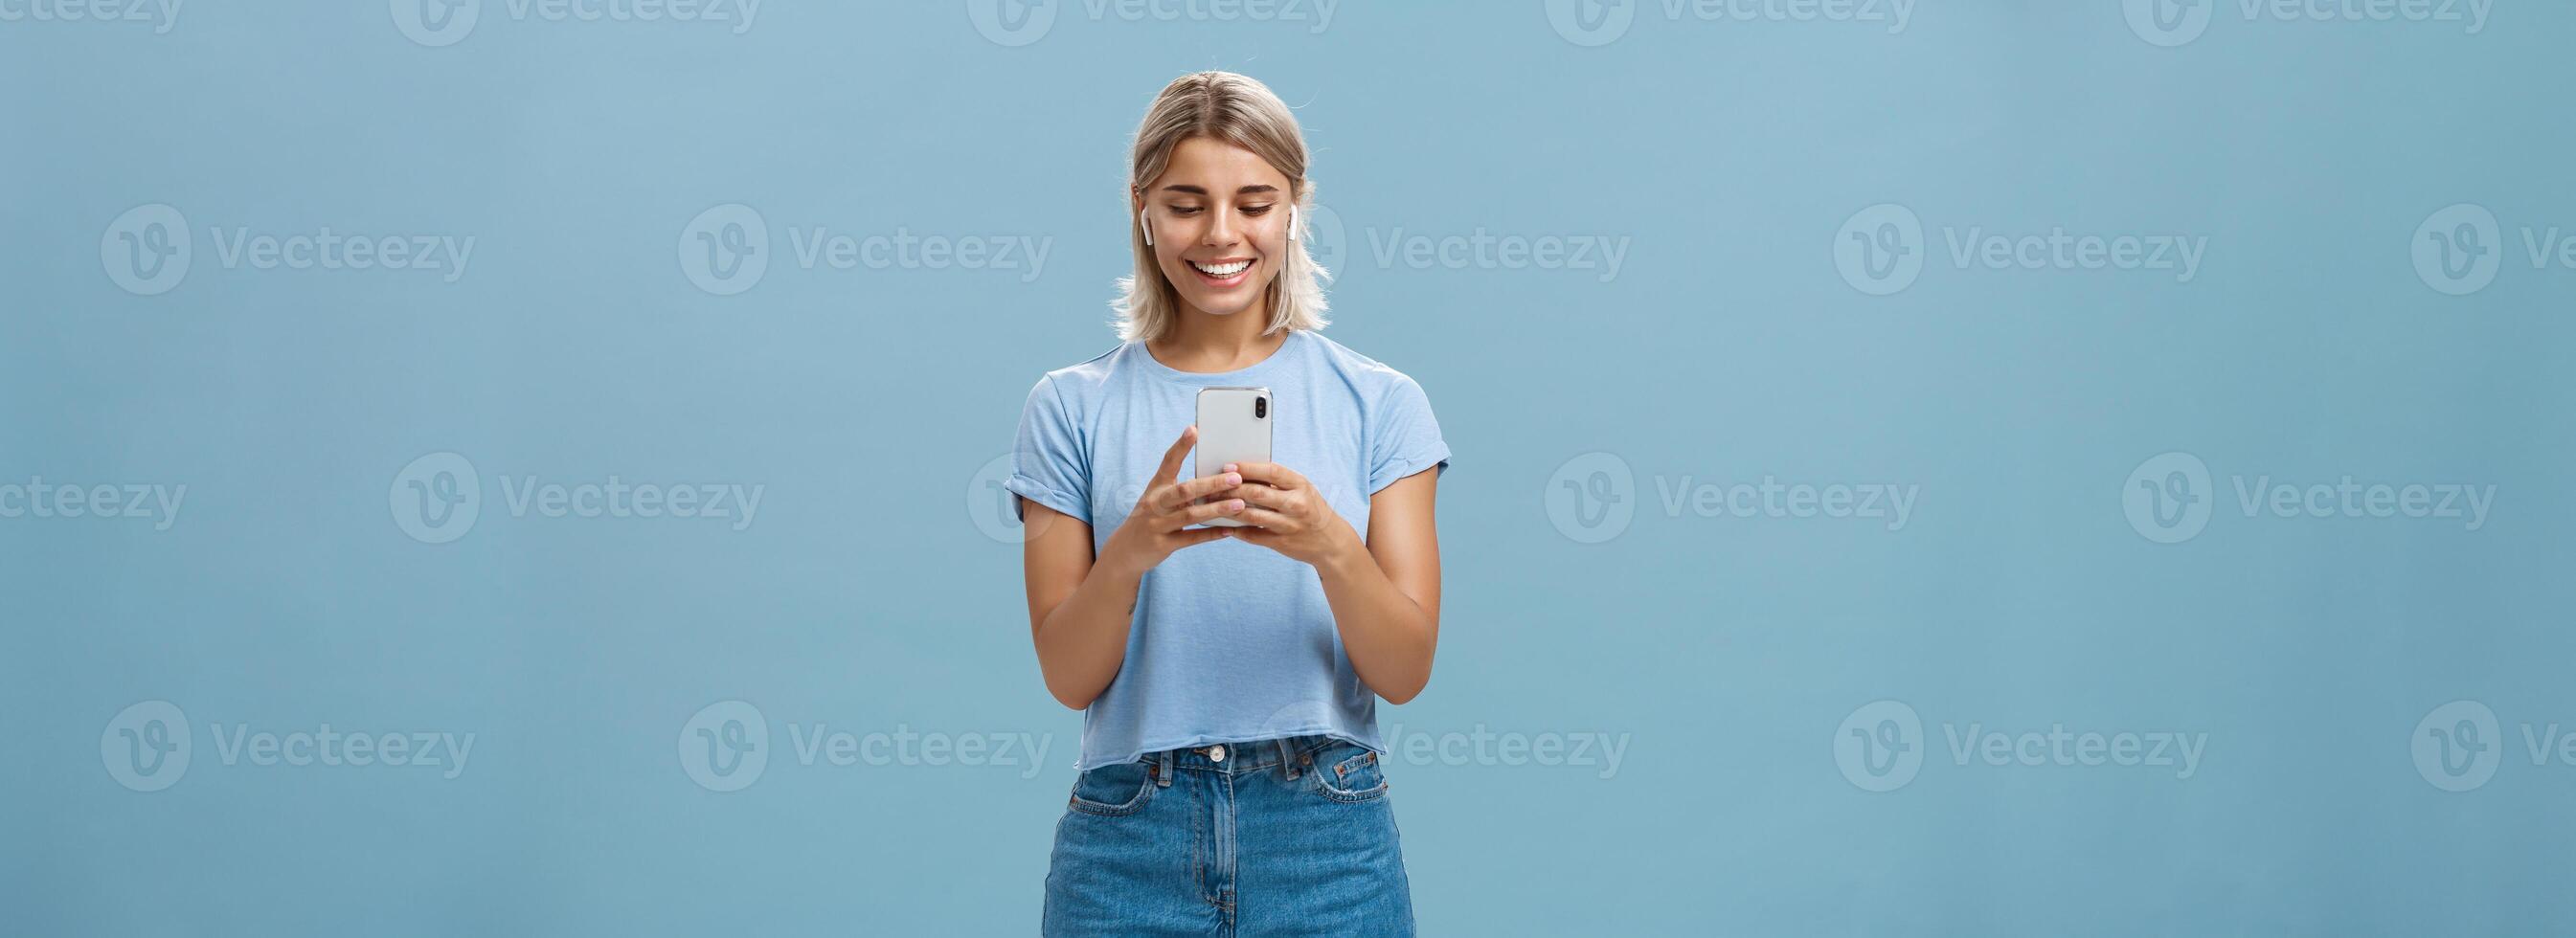 Girl having funny convesation, speaking with friend via video messages in wireless earphones holding smartphone in both hands smiling happily at device screen being entertained and amused photo